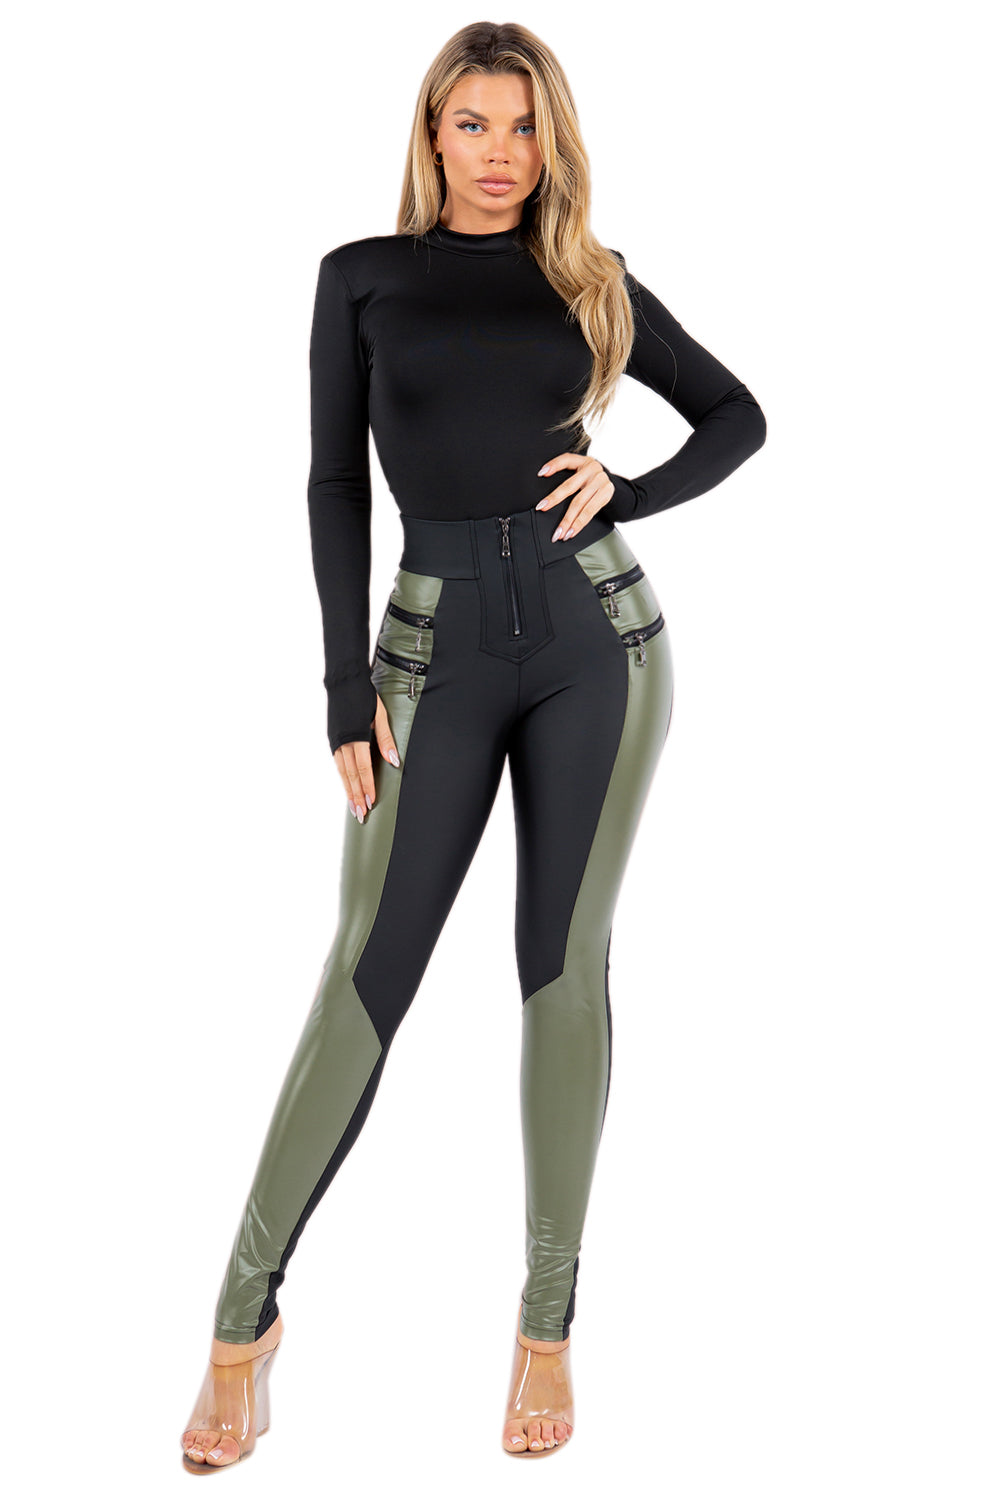 Women's Stretch Pleather Color Block Leggings with Front Zipper and Back Pockets